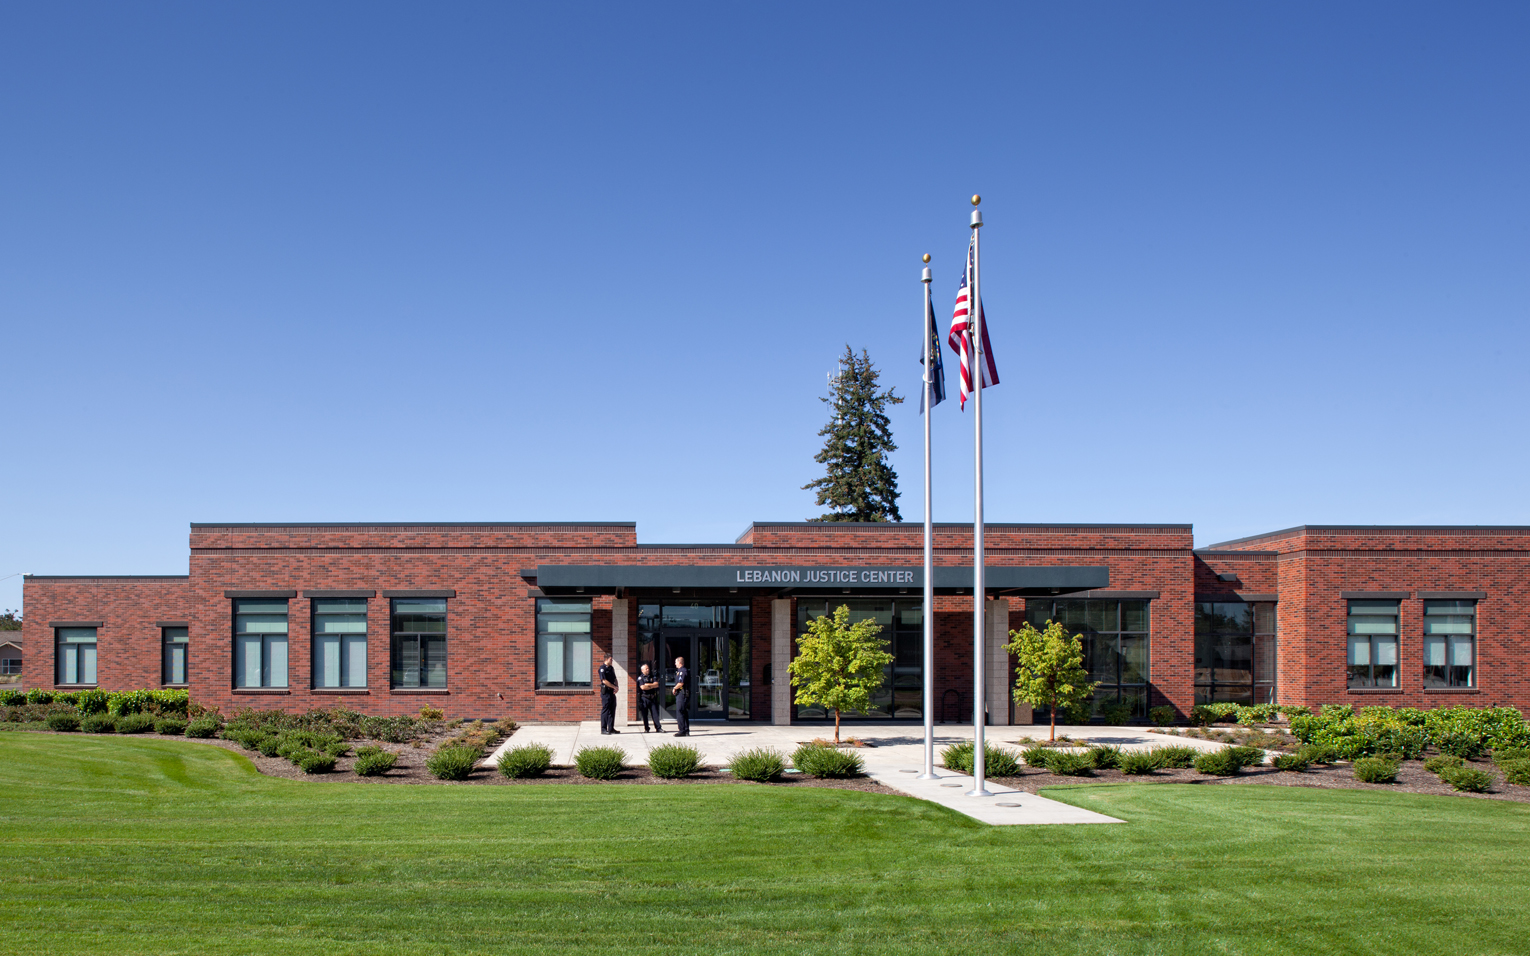 Lebanon Justice Center. Single-story, long, brick-clad public safety building with a small plaza in front, surrounded by a vast green lawn. Both the American and Oregon flags are being flown on a sunny, cloudless day.